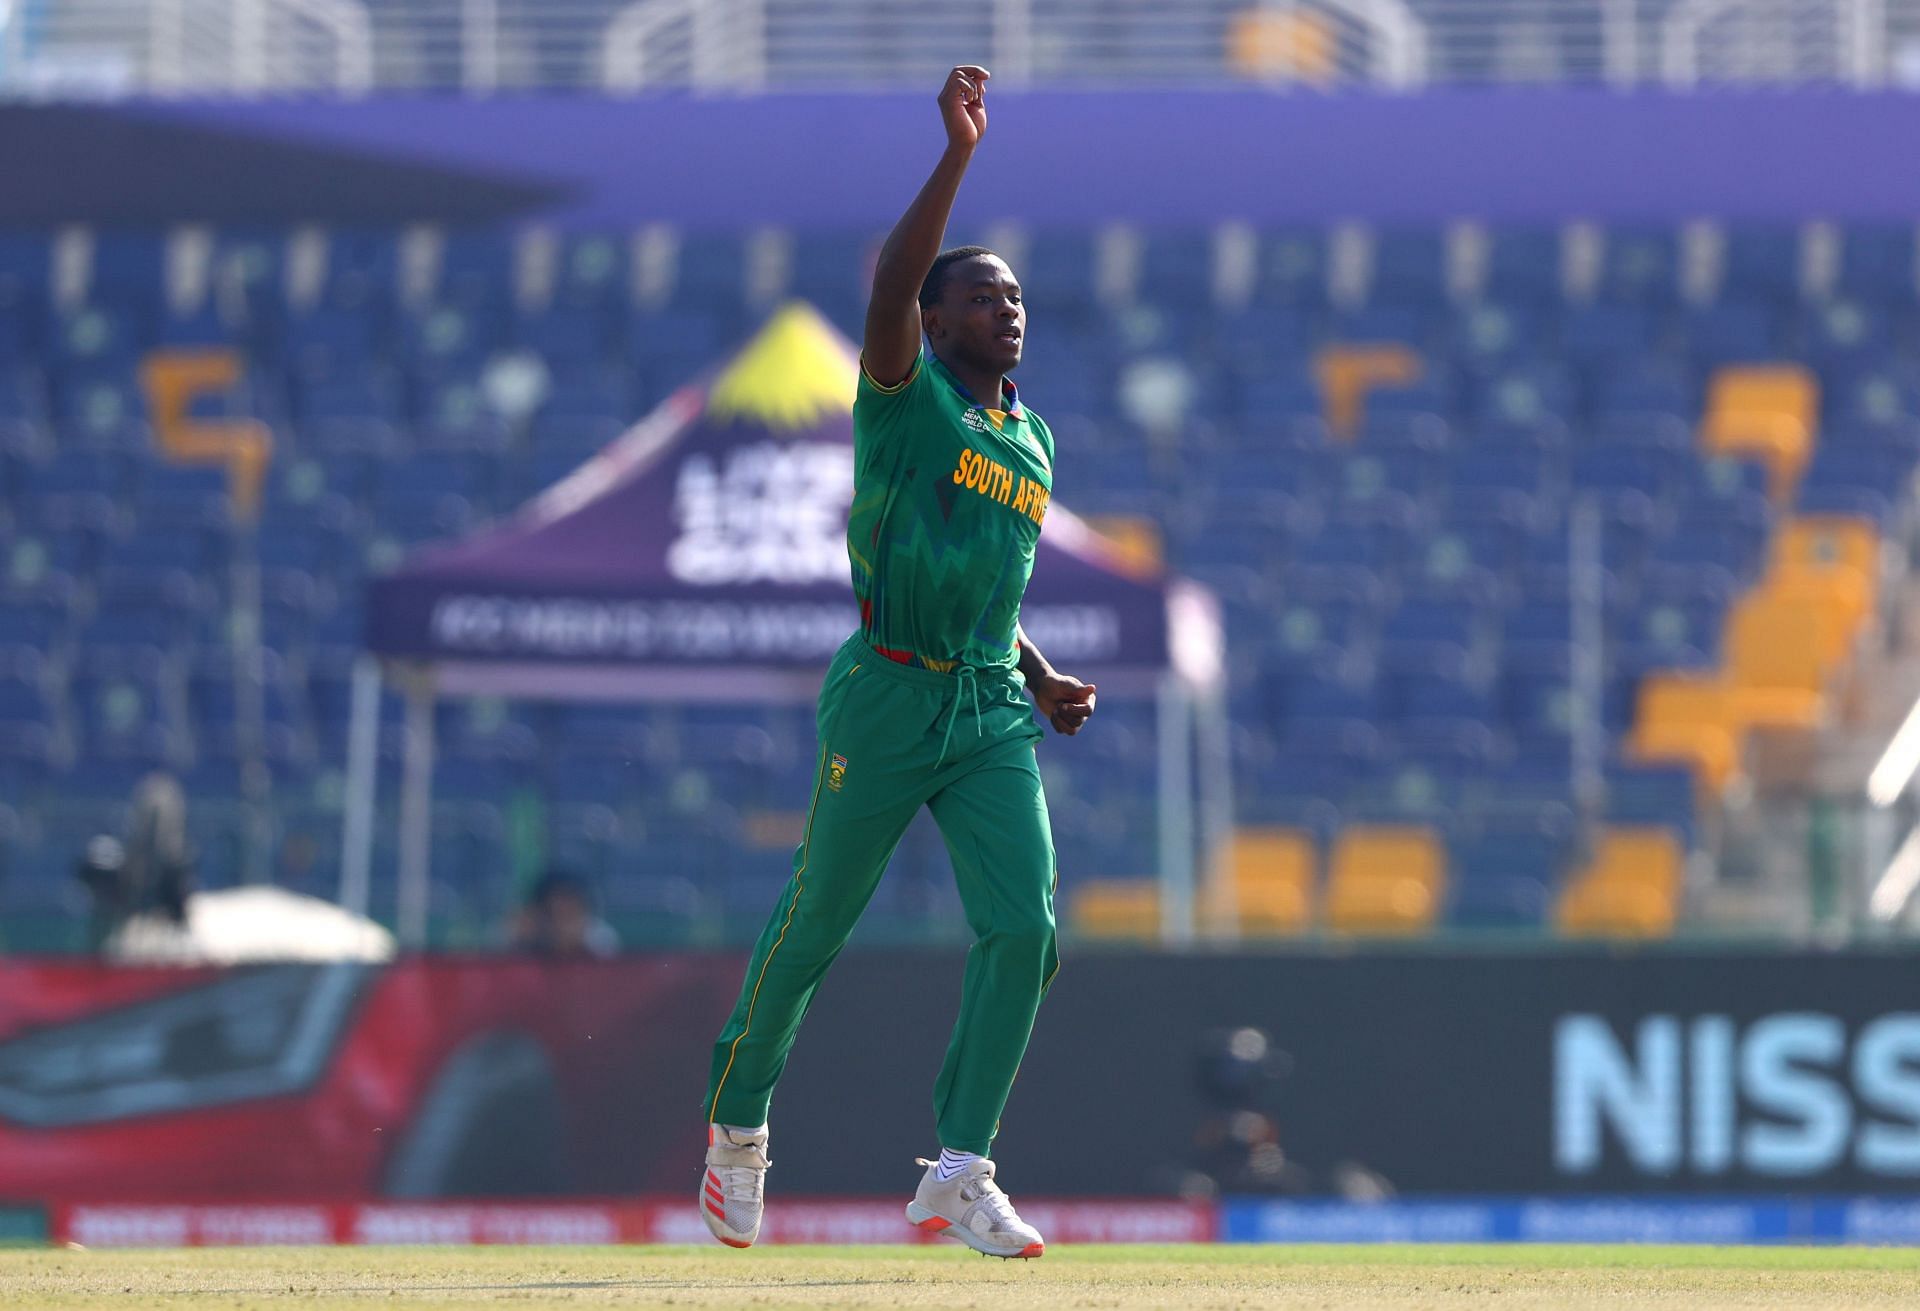 Kagiso Rabada is the pace spearhead for South Africa